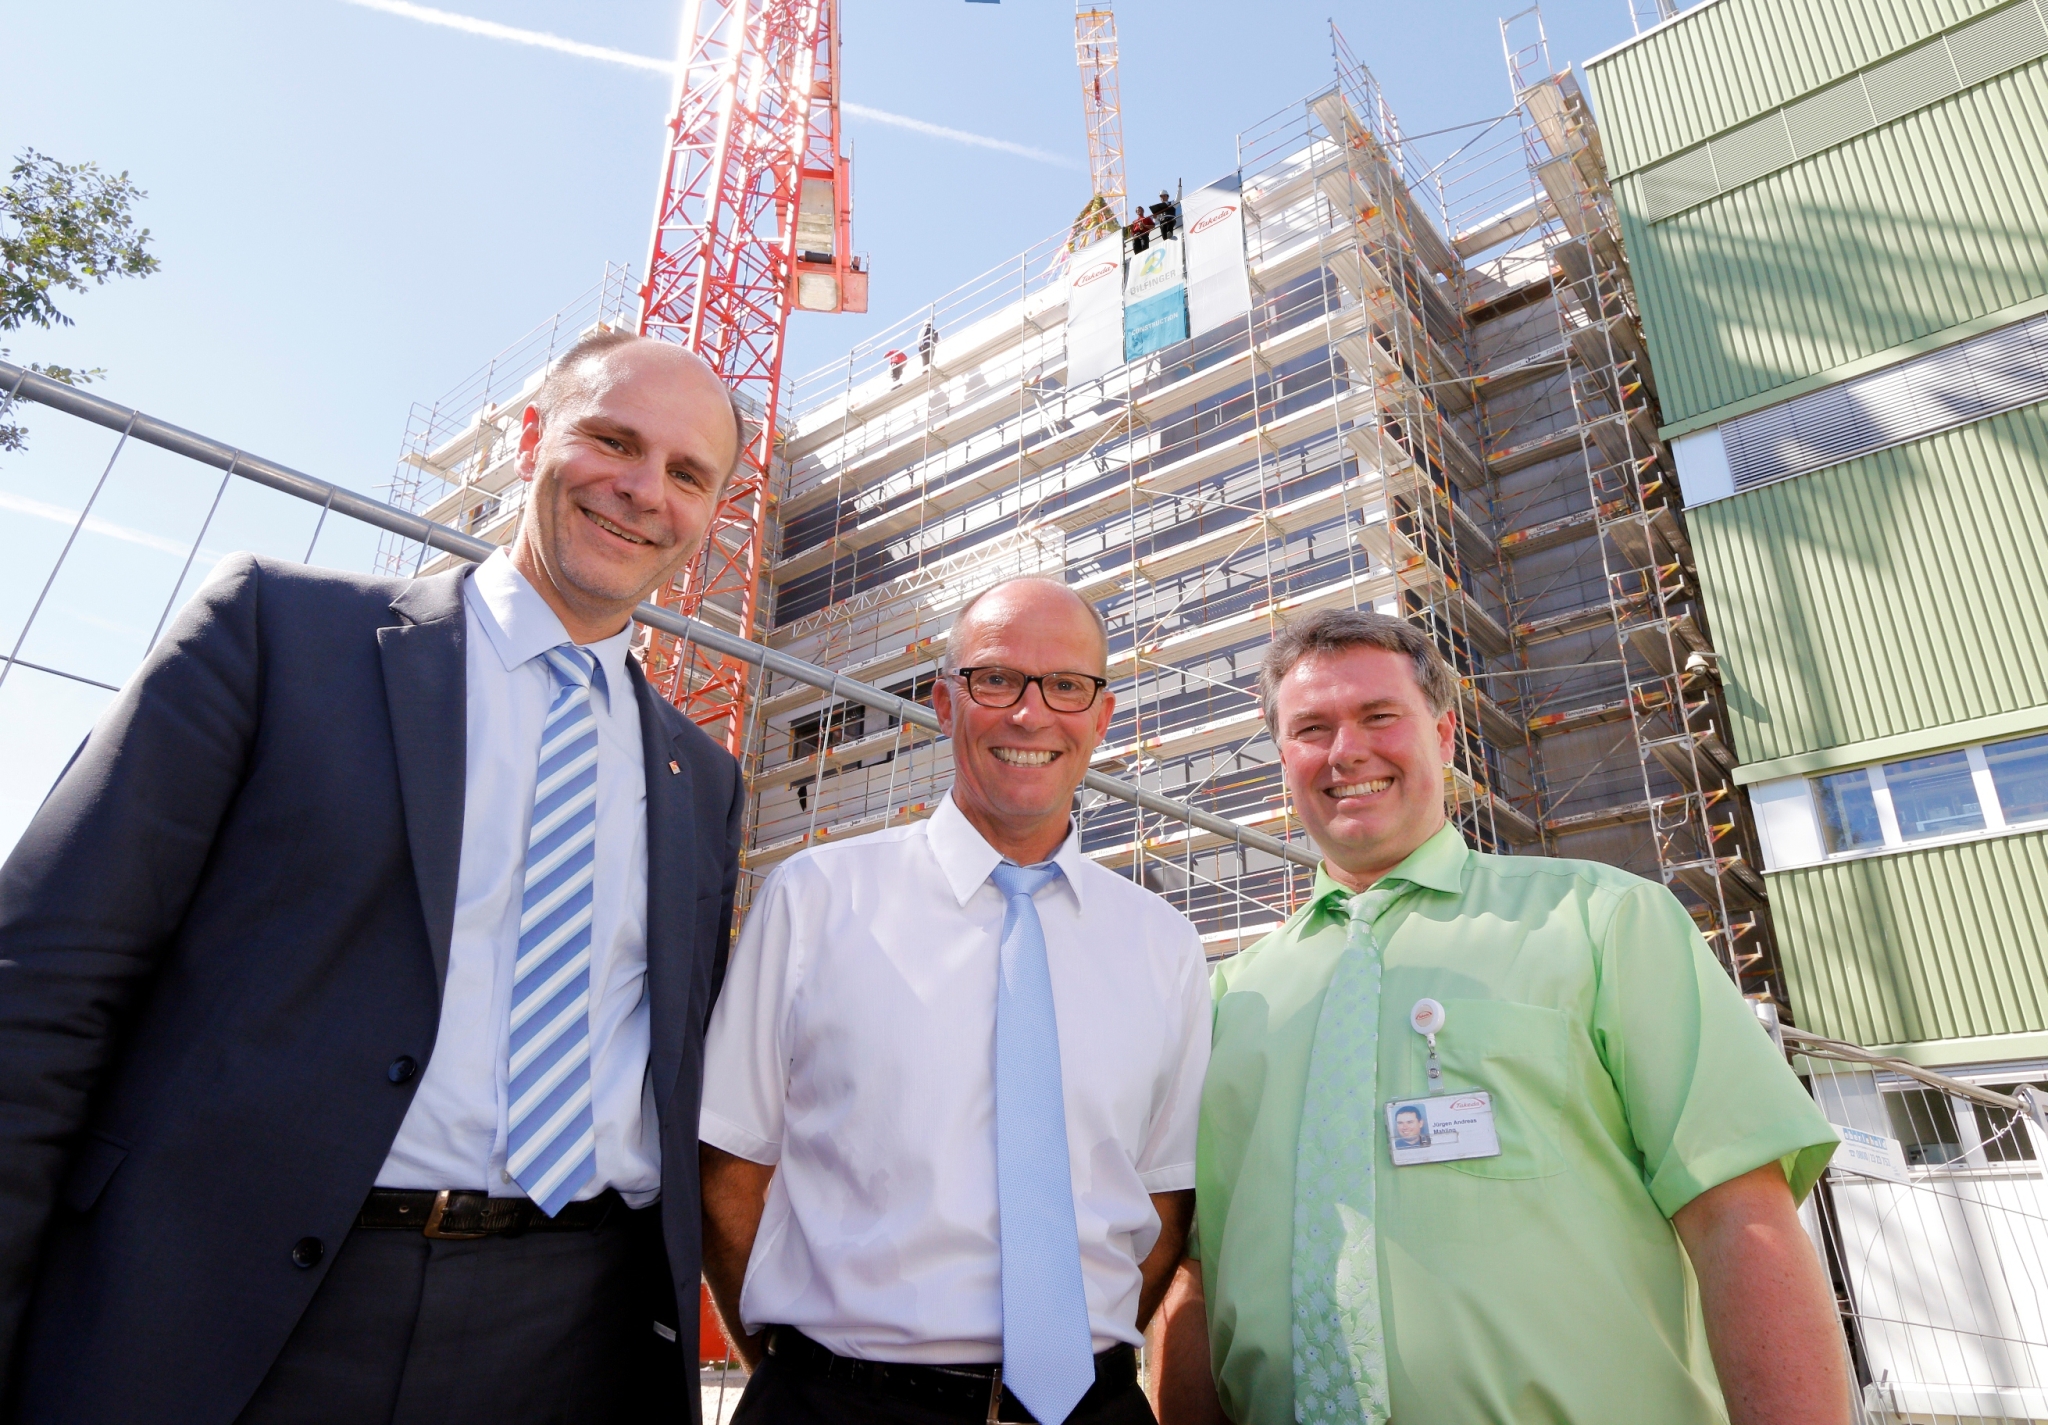 The photo shows Bernd Häusler (Mayor of Singen), Kim Konradsen (Vice President Operations Liquid & Steriles Europe, Takeda) and Dr. Jürgen-A. Mahling (Manager of the Singen-based Takeda subsidiary) during the topping out ceremony for a production building